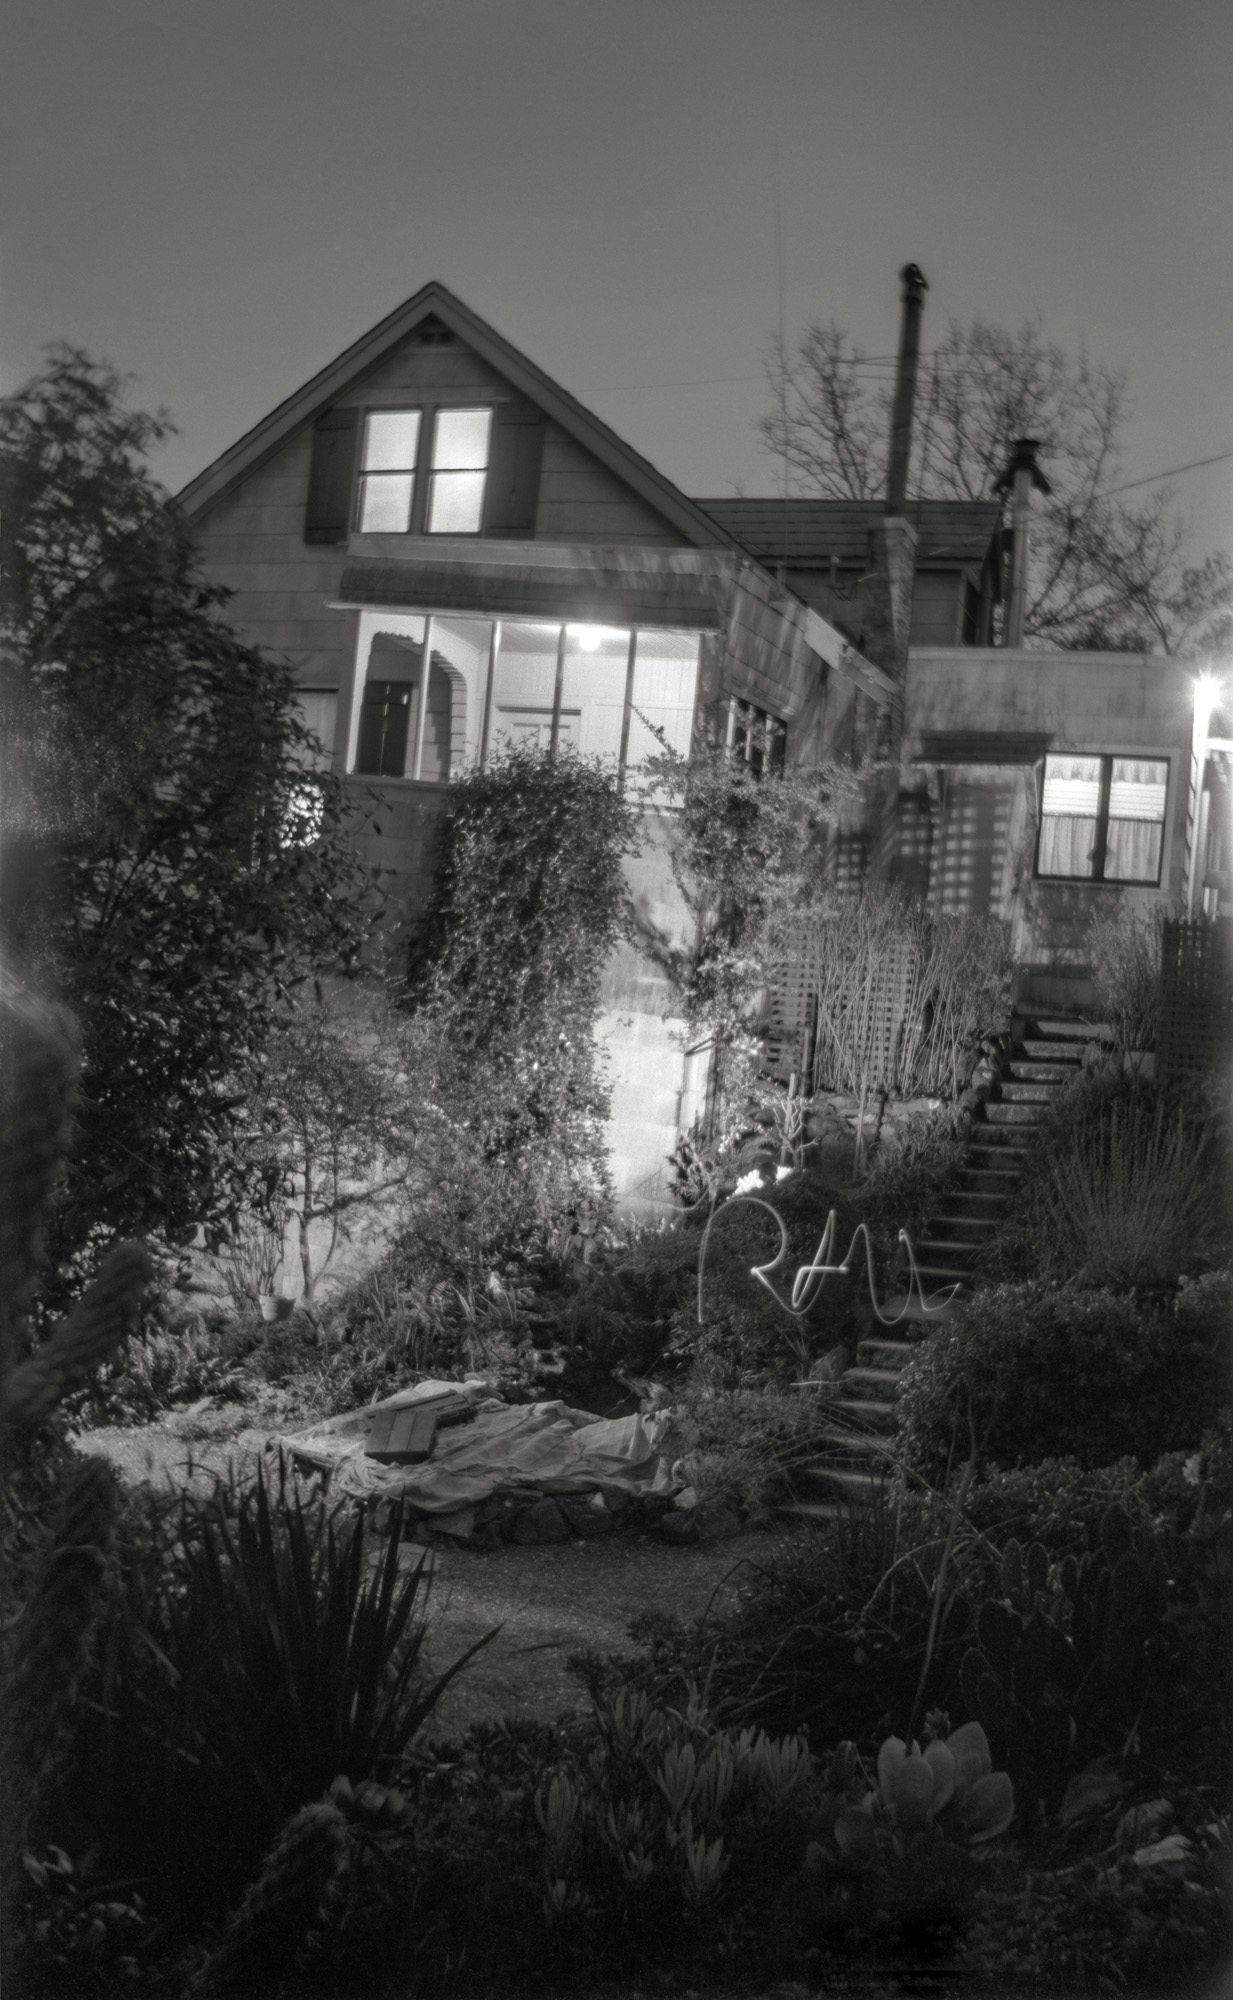 Shorpy being the Historic American Photo Archive, and me being American and at this point in my life historic, I present from my archive a nighttime photo experiment I performed in winter 1962 while a teenage camera geek. This is how I made this time-exposure of our Larkspur, California house: I turned on all the lights in the front-facing rooms, also those on the porches and front walk, and added one more (my desk lamp) below the front porch. I set up the camera (an old c. 1920 folding job) in the cactus garden, opened the shutter, ran down to the bottom of that stairway and wrote out my name with a little flashlight, then ran back up and closed the shutter. Voilà! I used that old camera, a Kodak Folding Autographic Brownie 2A, because it was the only one around the house then that could take time exposures. No tripod receptacle, so I had to balance it on something or other. (I know it's winter because of the burlap sacks covering the lantana for frost protection. Oh, and before you ask, no, we're not related to the Addams family.) Scanned from the original "116" 2½ x 4¼ negative, slightly cropped at top. View full size.